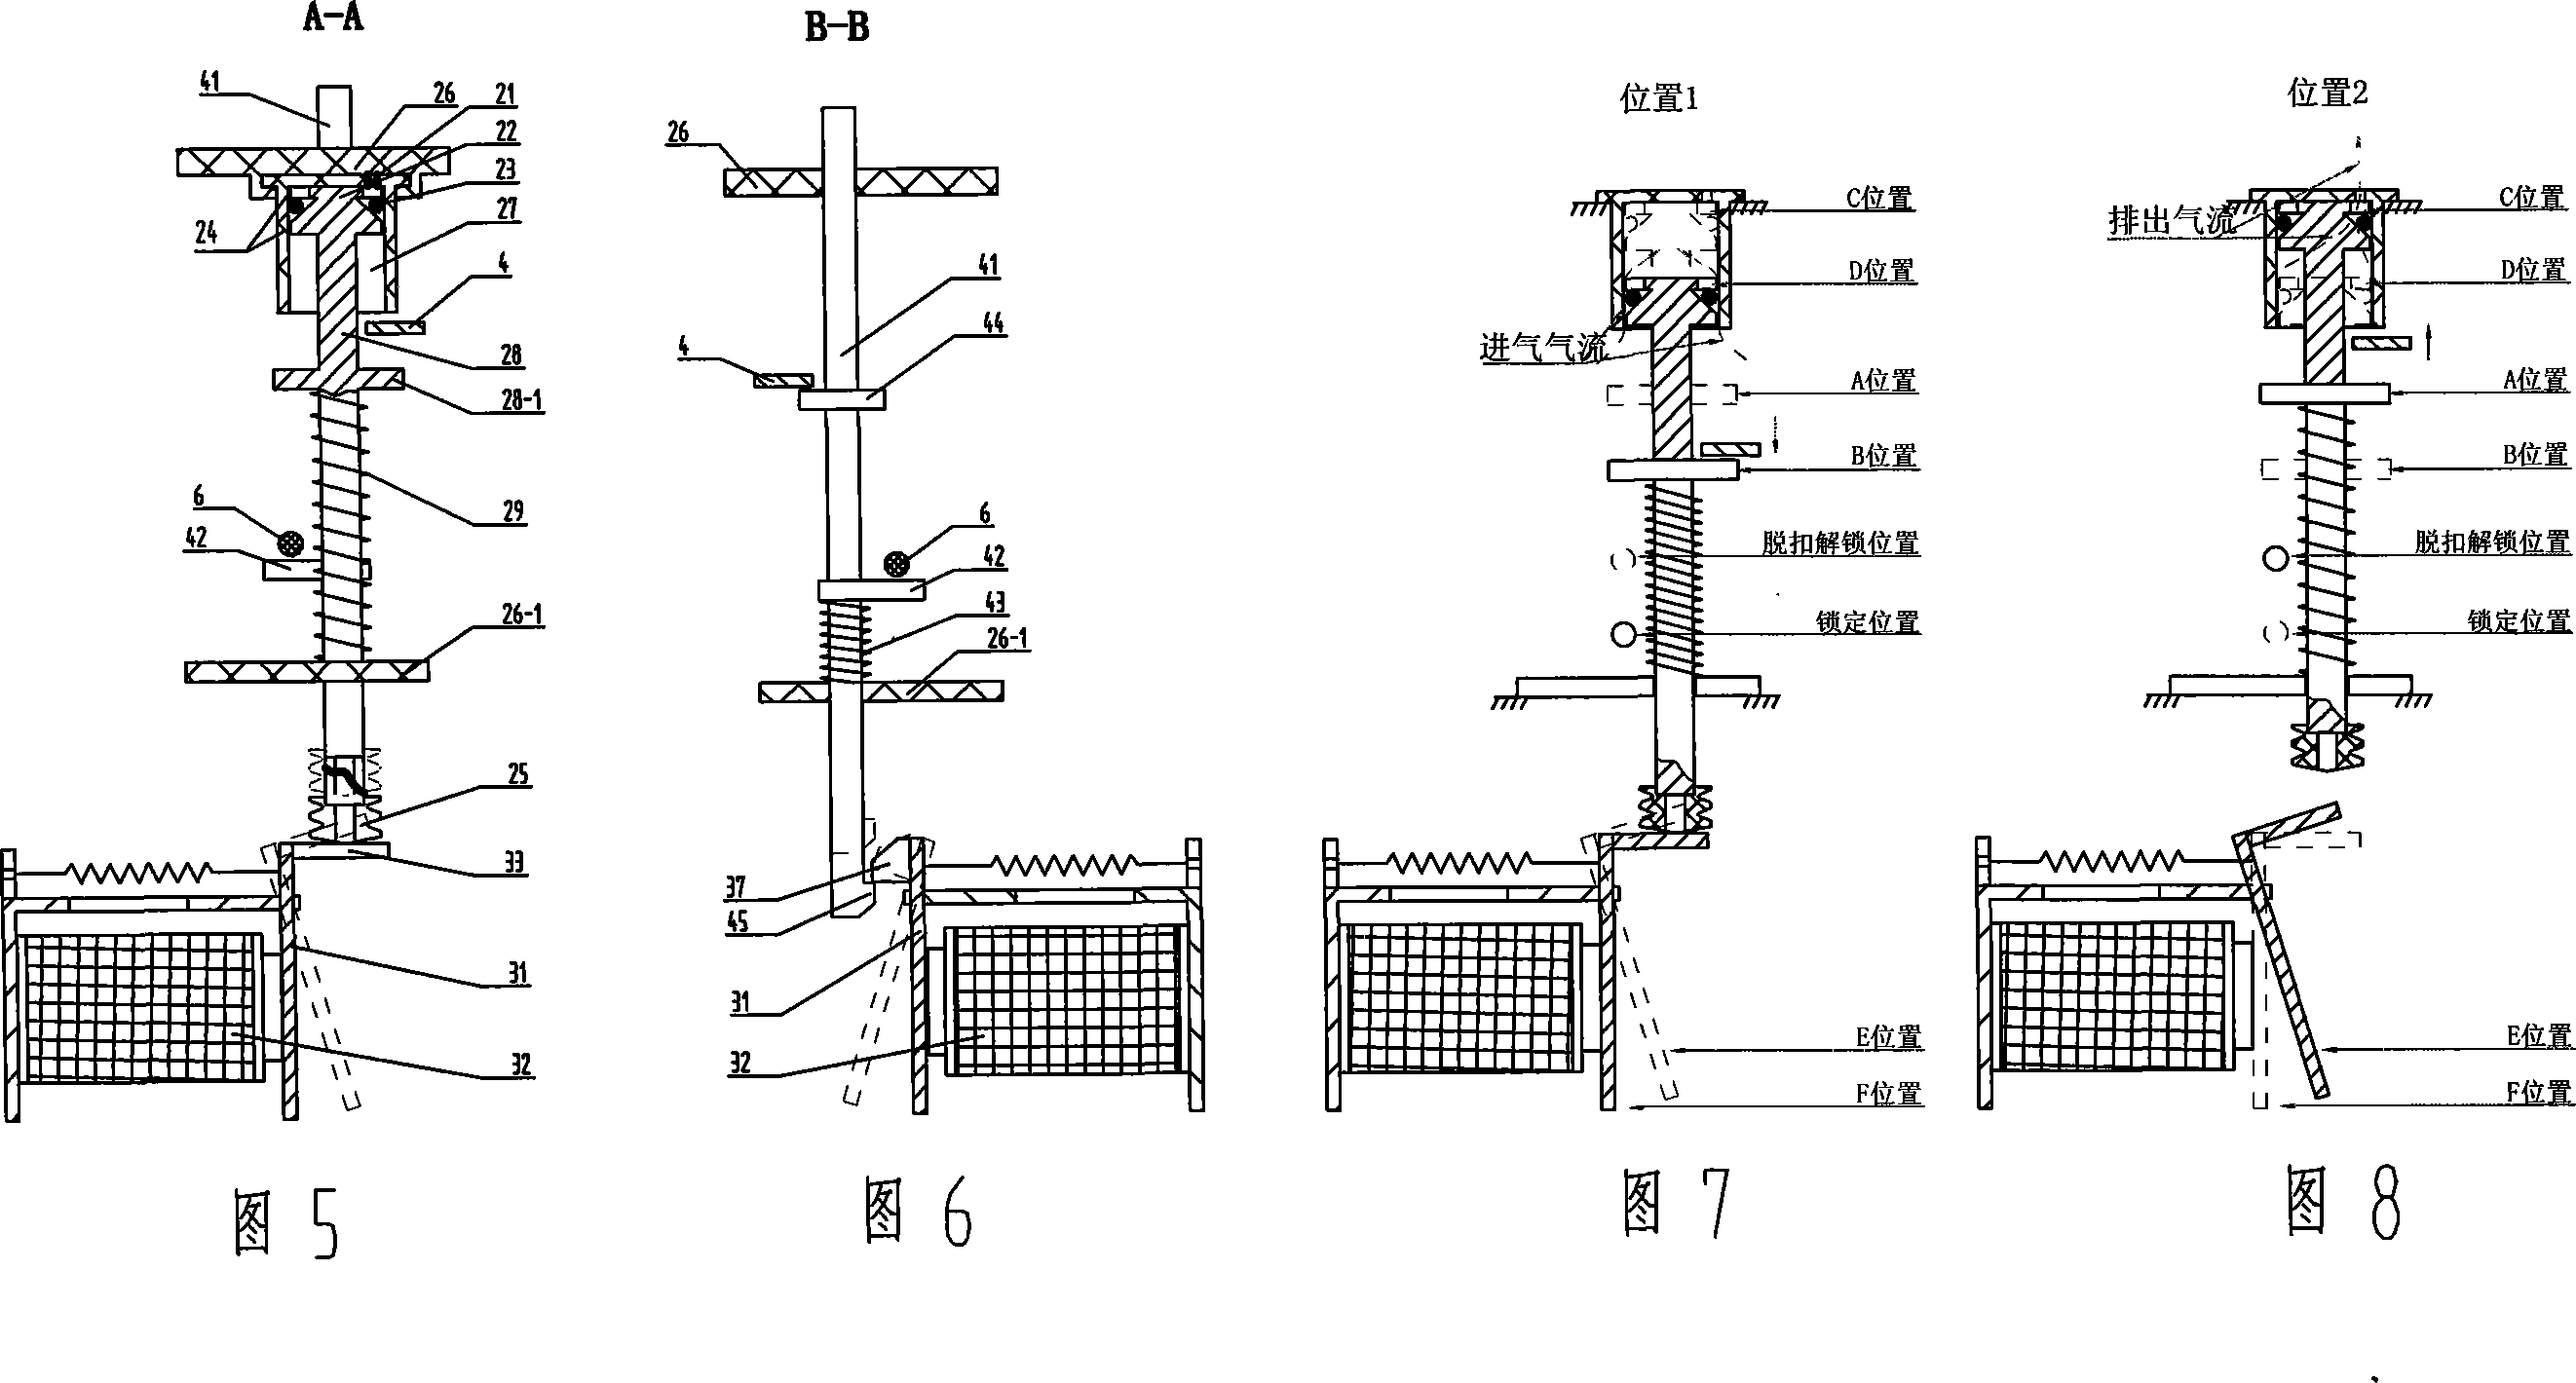 Plastic-shell electromechanical integrated three-phase AC motor protector with energy storage and impact device